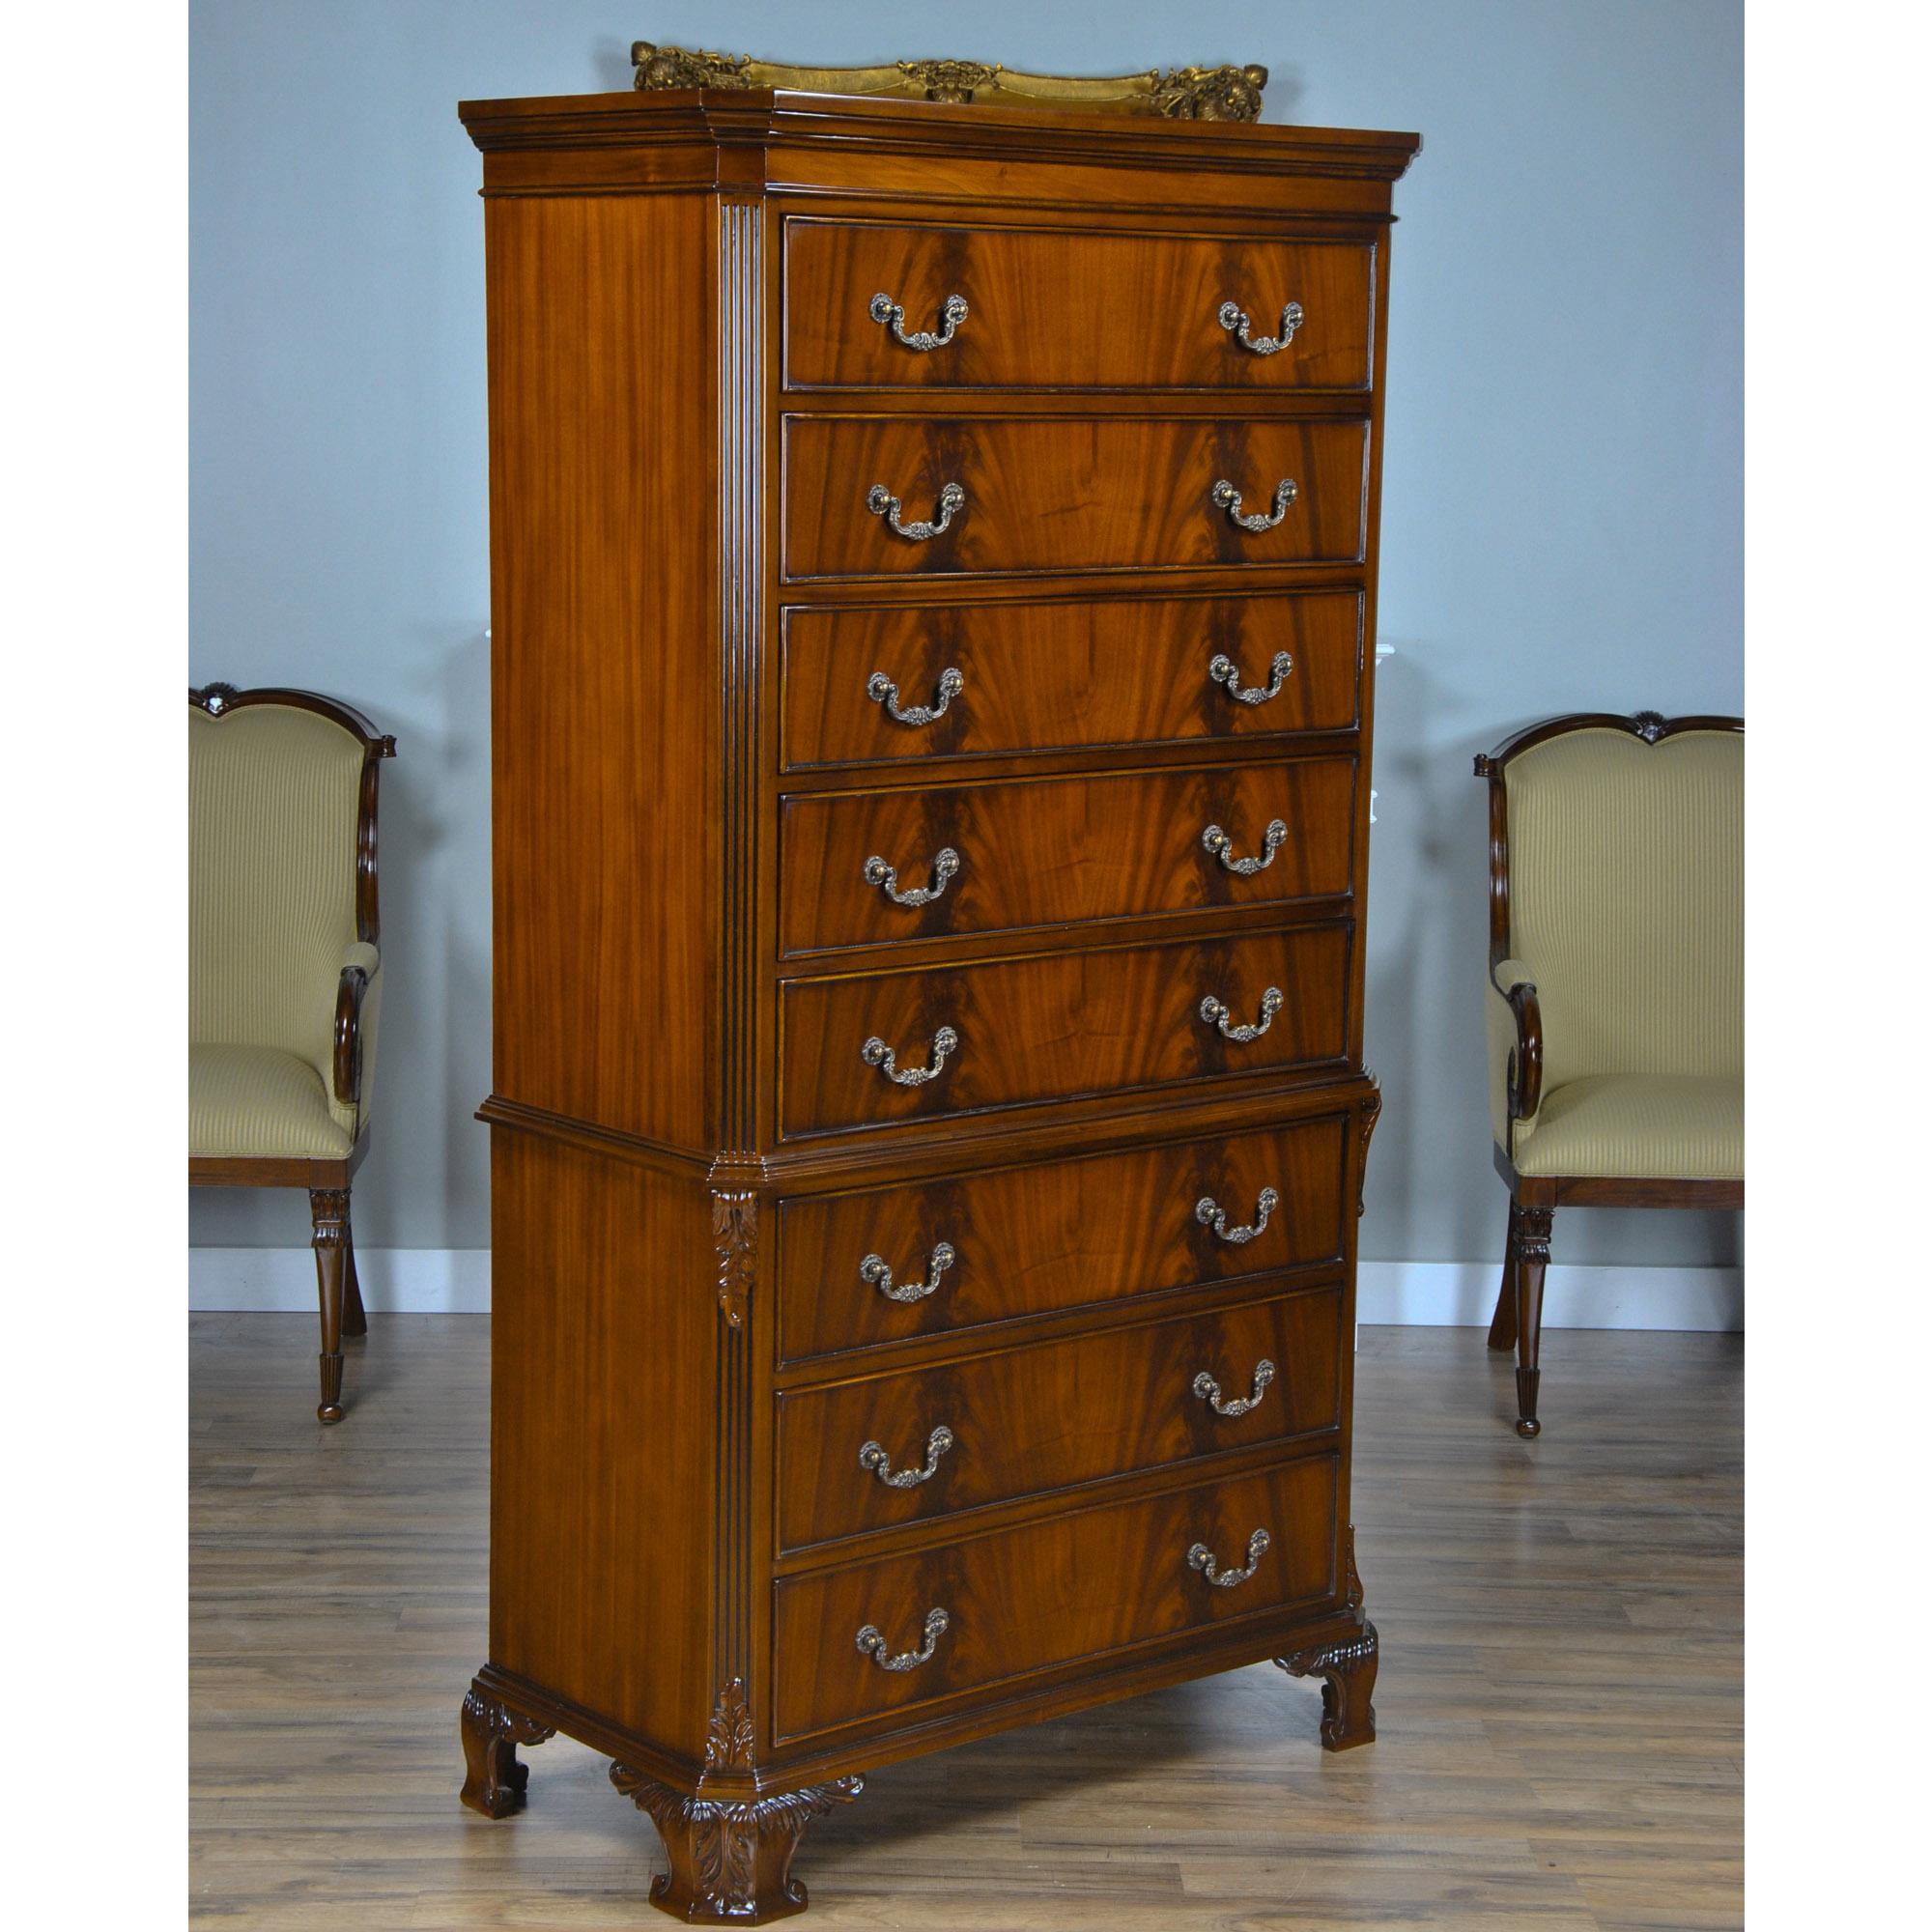 The Mahogany Chippendale Tall Chest will become the centerpiece of any room. Inspired by Chippendale design the two part construction lends elegance to any setting. Resting on hand carved, solid mahogany feet the eight drawers soar upwards to